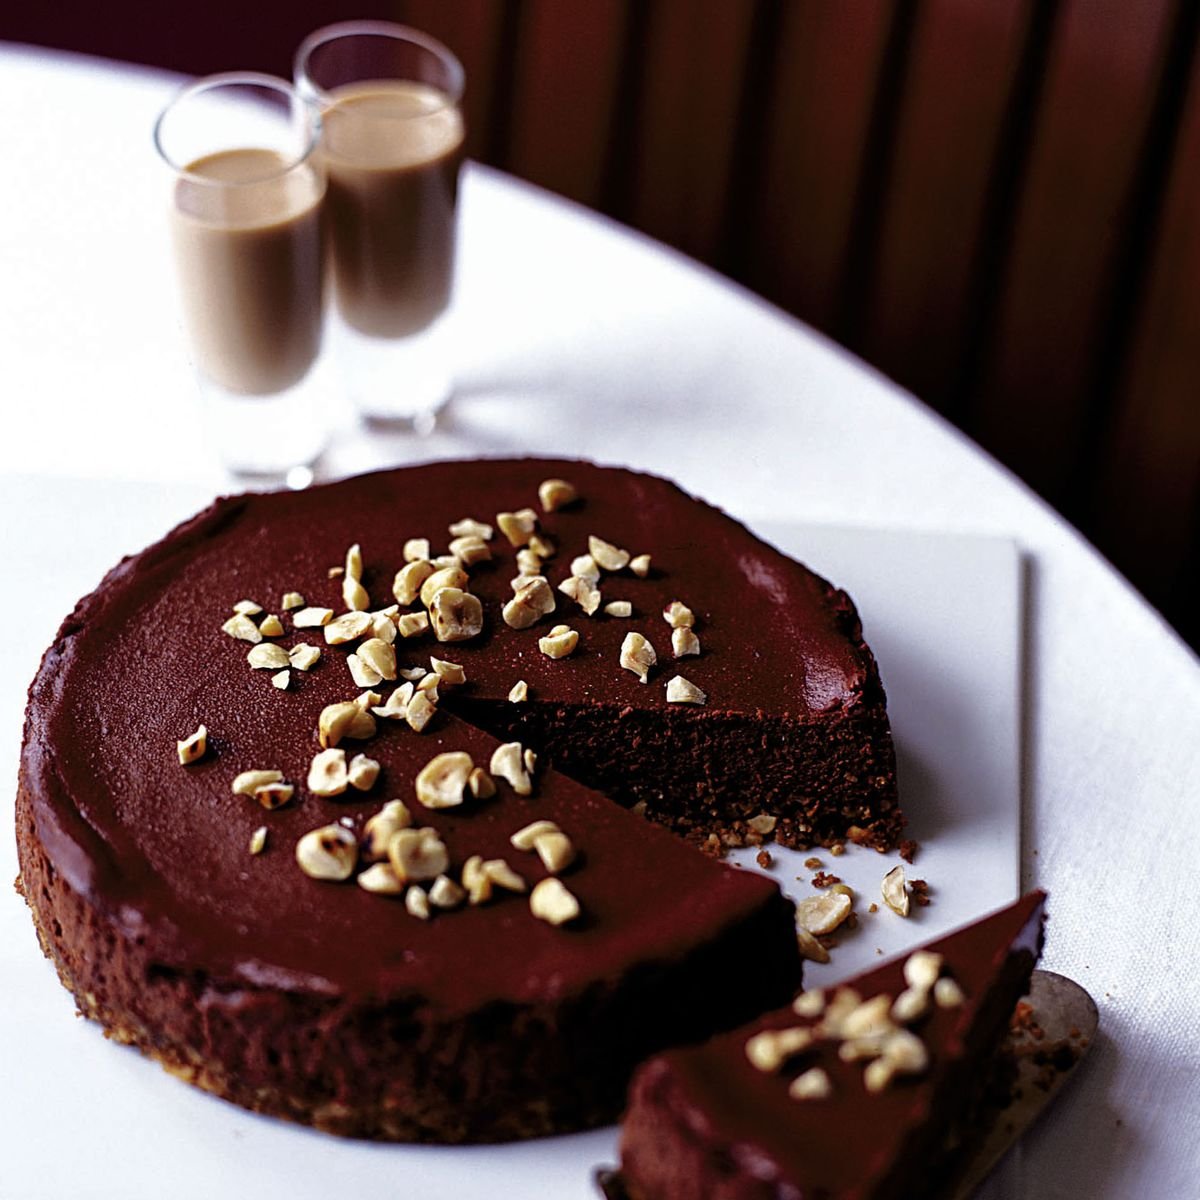 Make this chocolate, hazelnut and amarula cheesecake for a decadent end to your feast